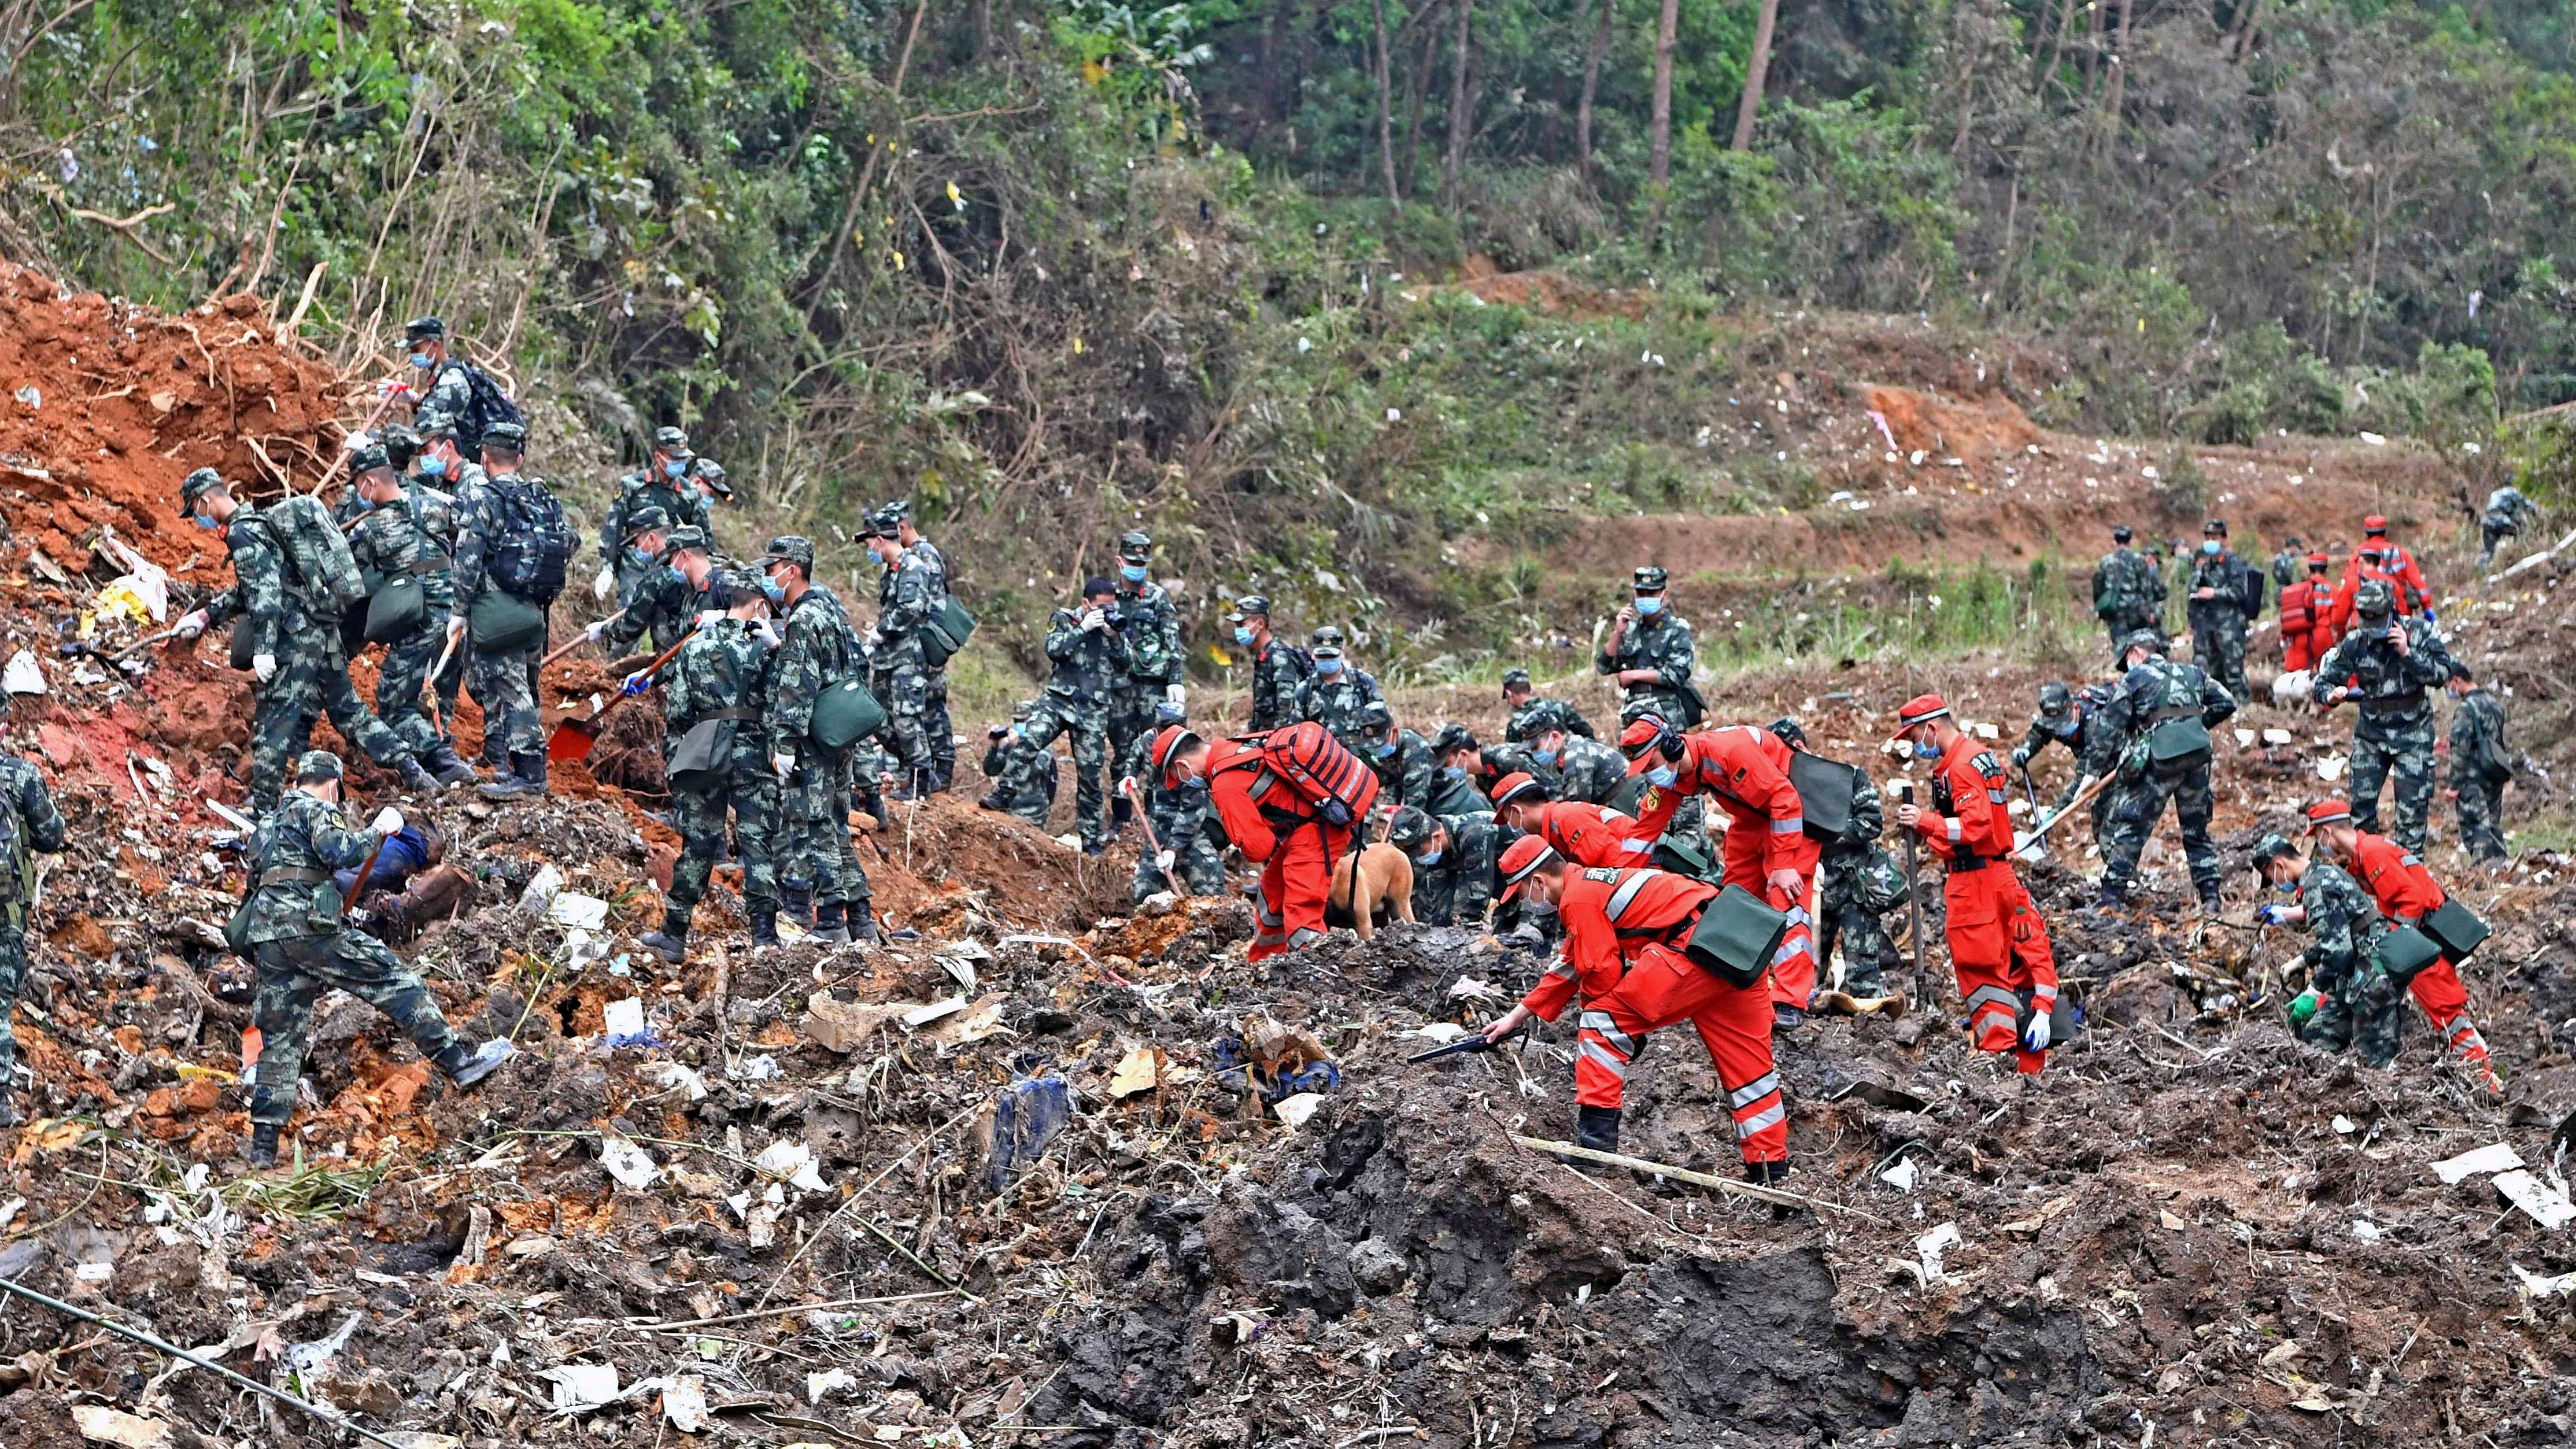  In this photo released by Xinhua News Agency, rescue workers search for the black boxes at a plane crash site in Tengxian county, southwestern China's Guangxi Zhuang Autonomous Region. Credit: AP Photo